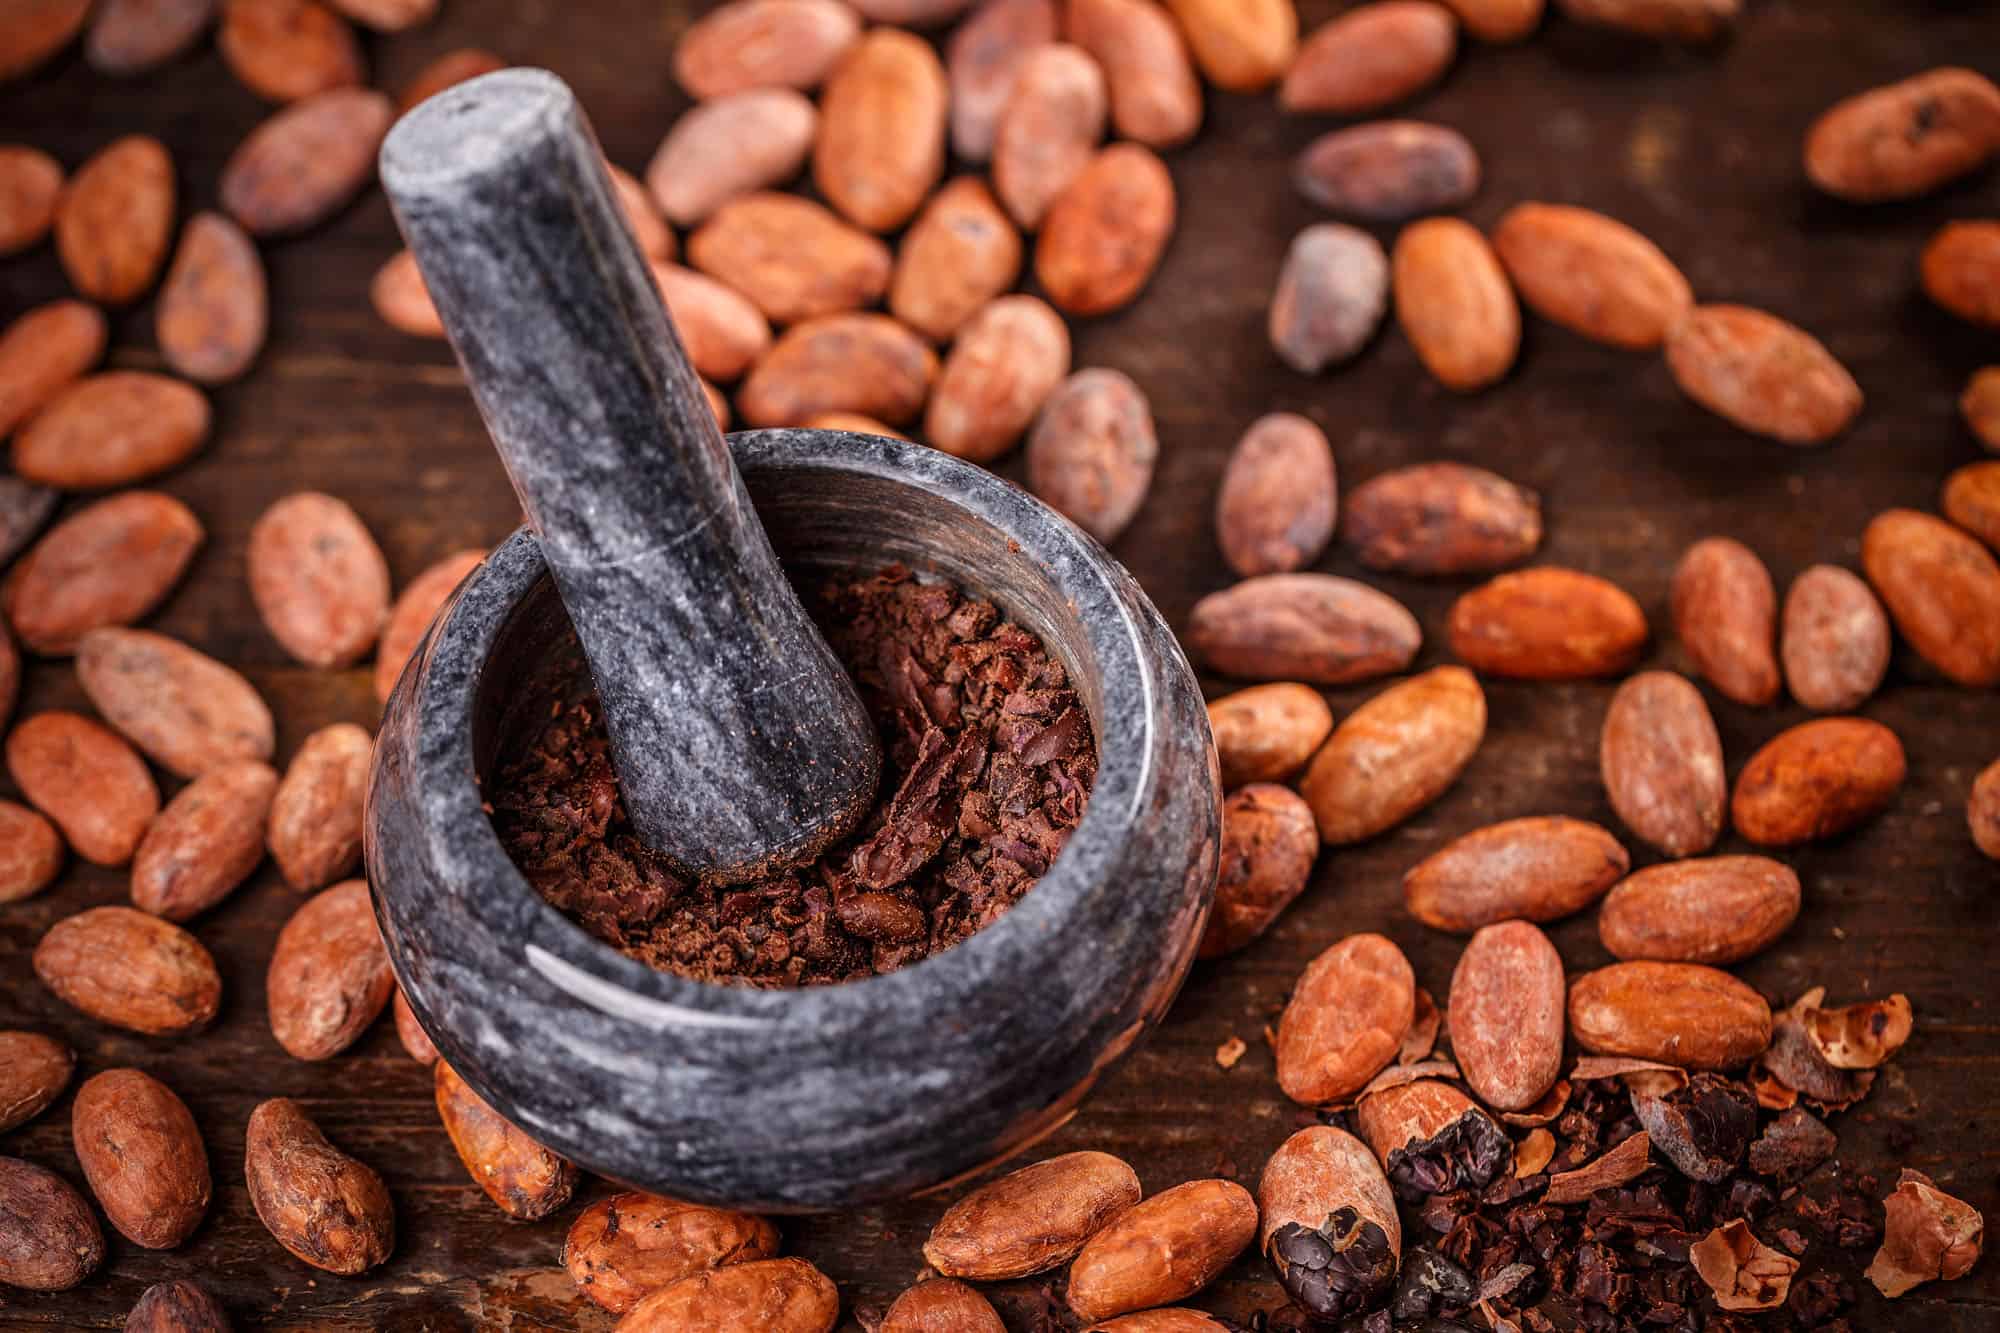 Cocoa beans being ground in mortar and pestle